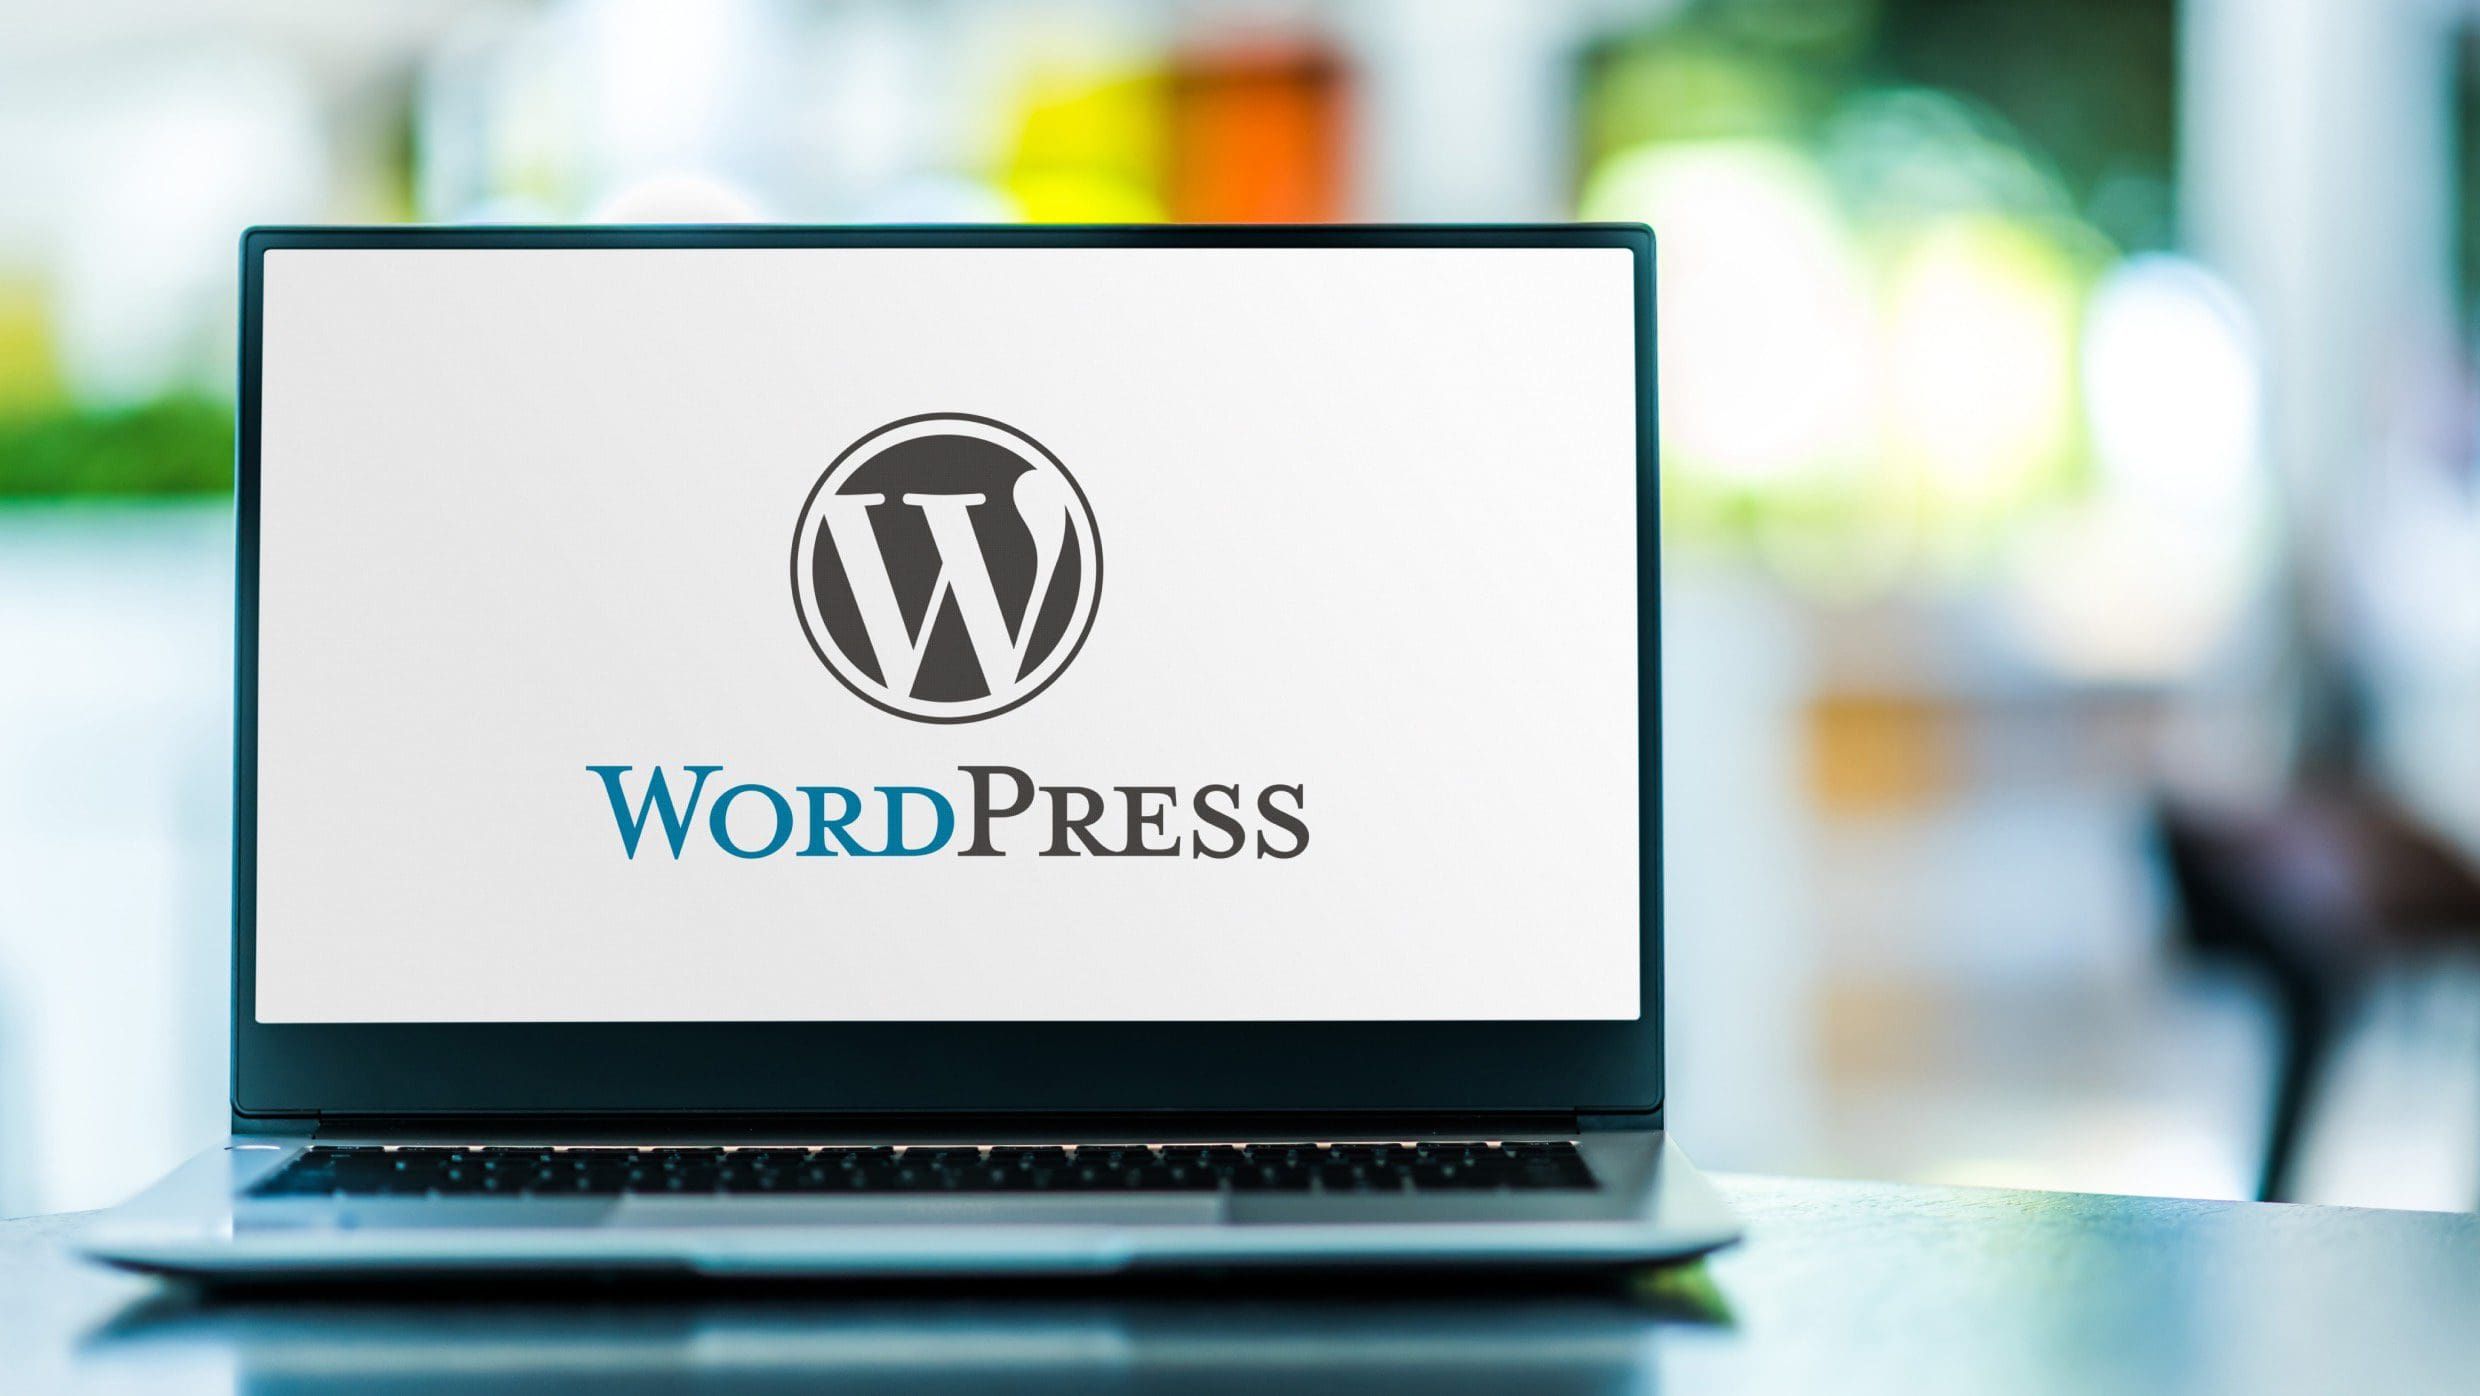 Our Unique PSD to WordPress Process